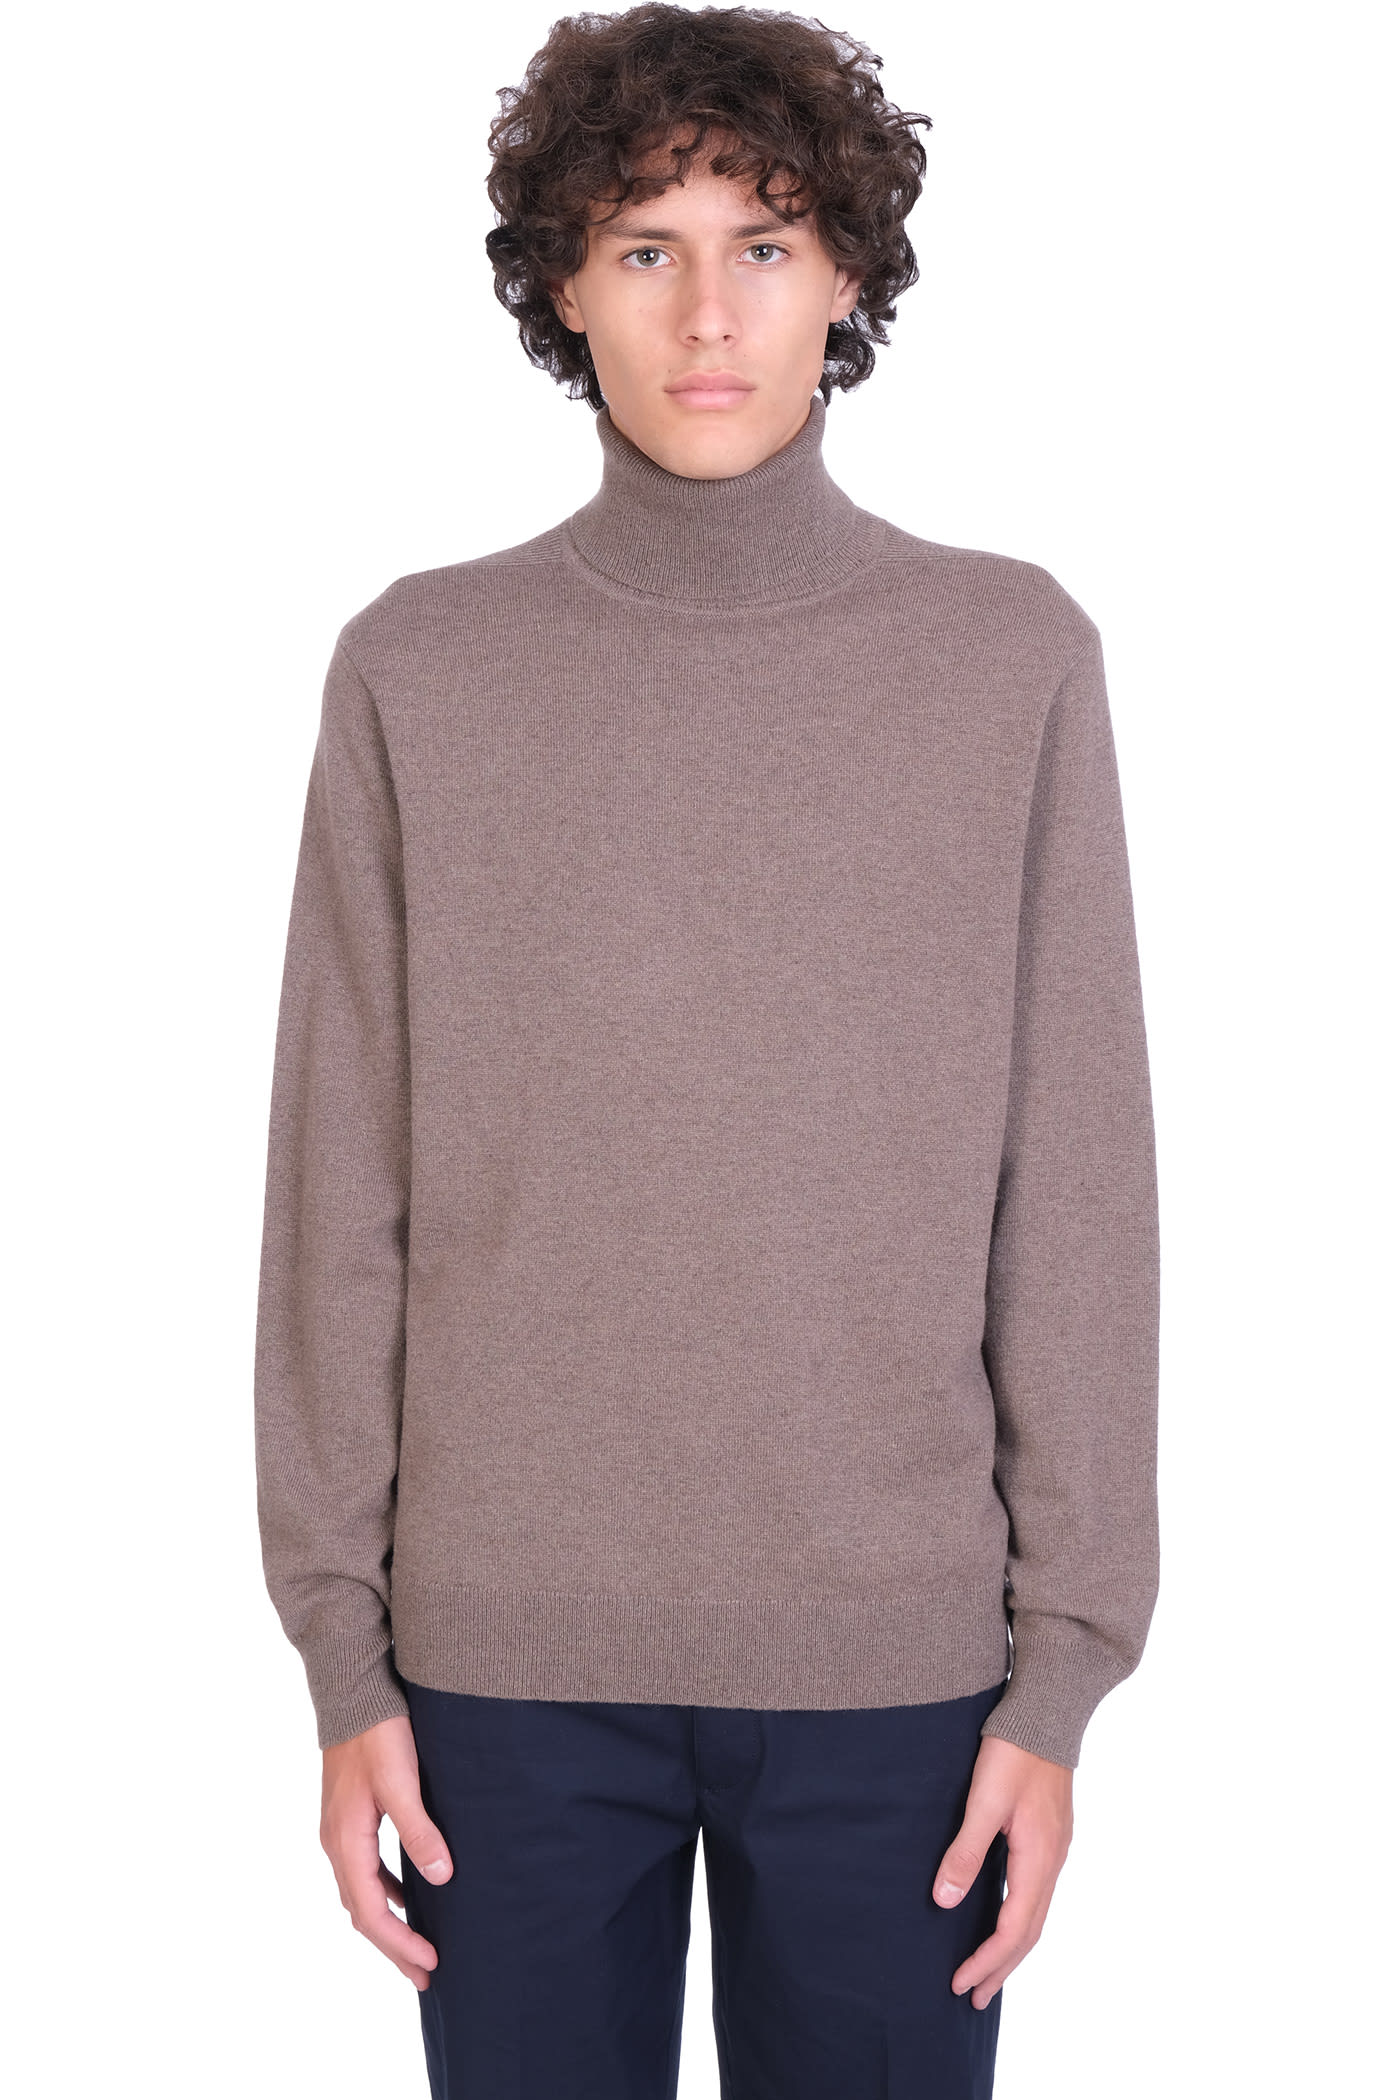 Theory Knitwear In Taupe Cashmere